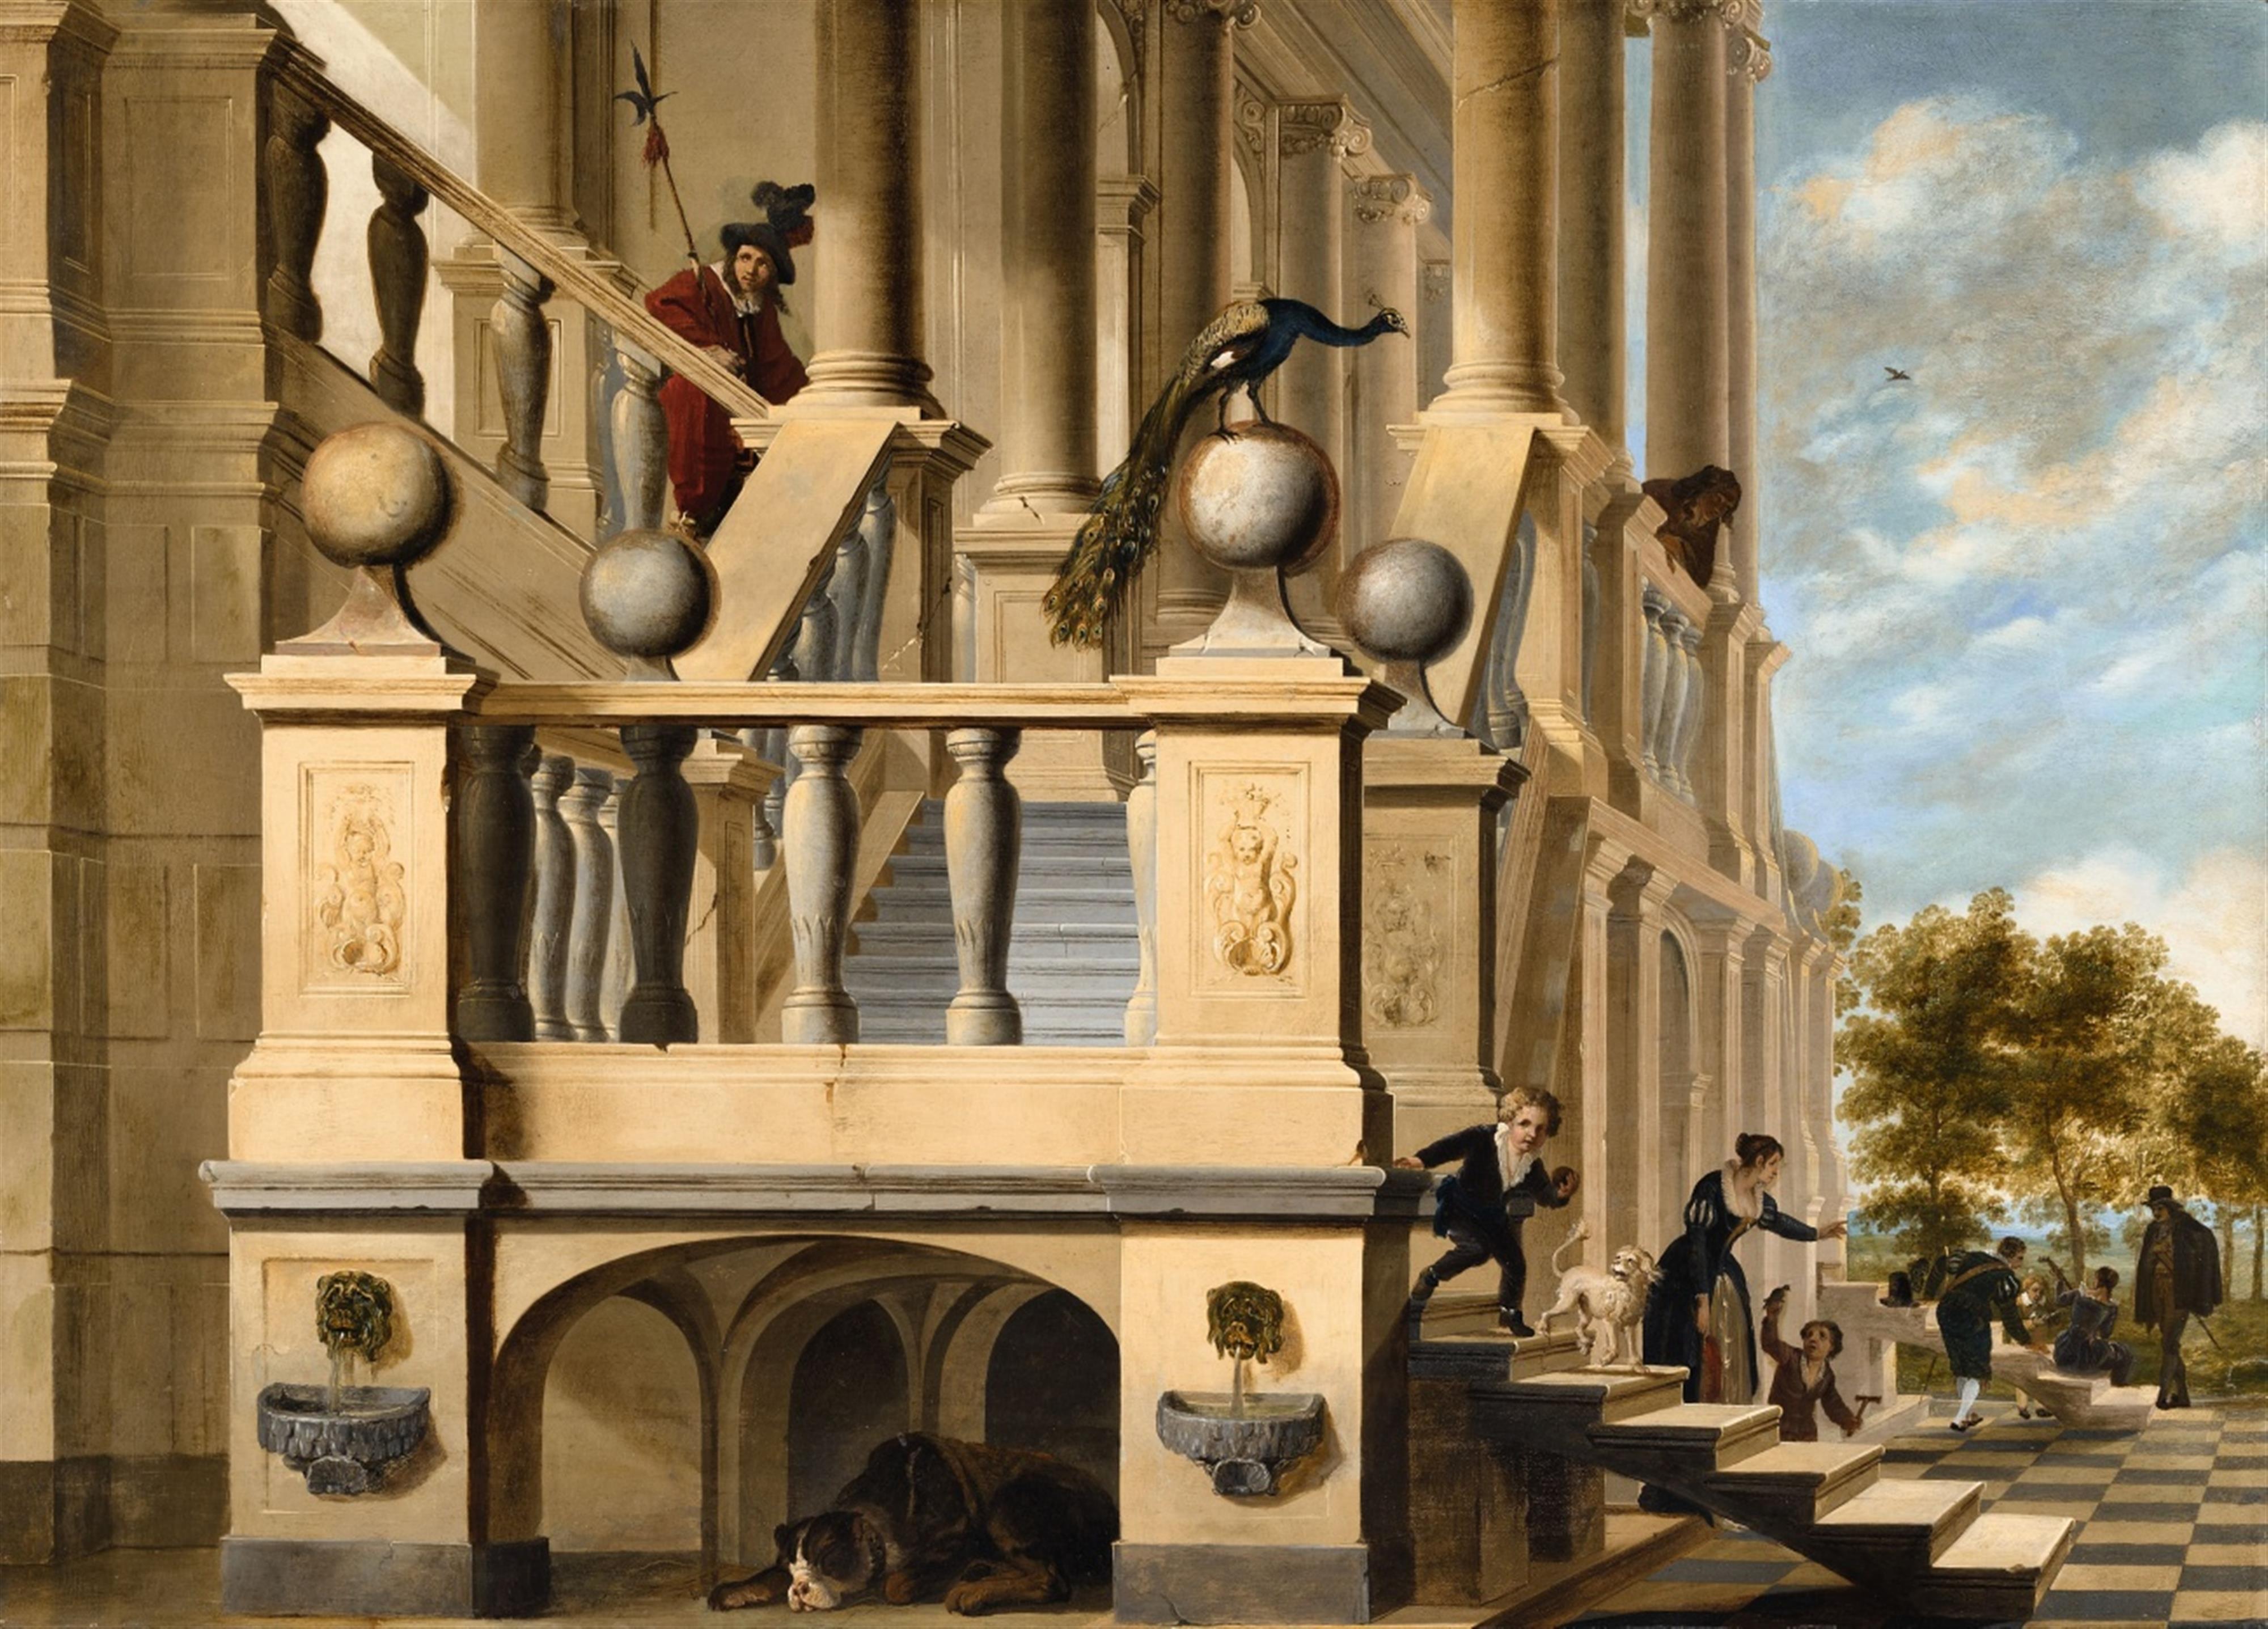 Christian Stöcklin, attributed to - Palace Architecture - image-1